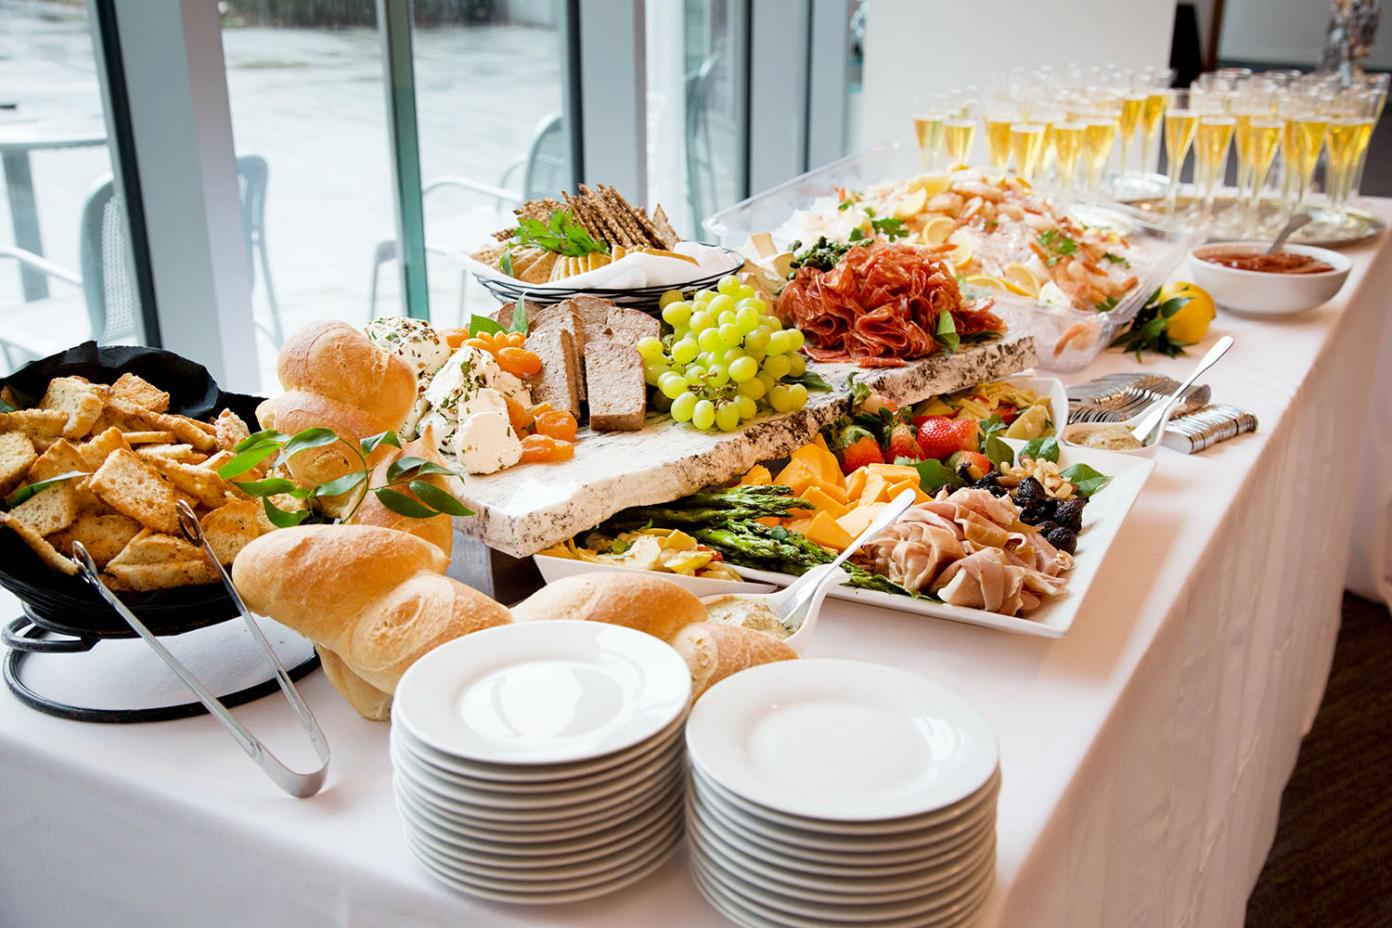 What Are The Best Party Catering Trends For 2023?